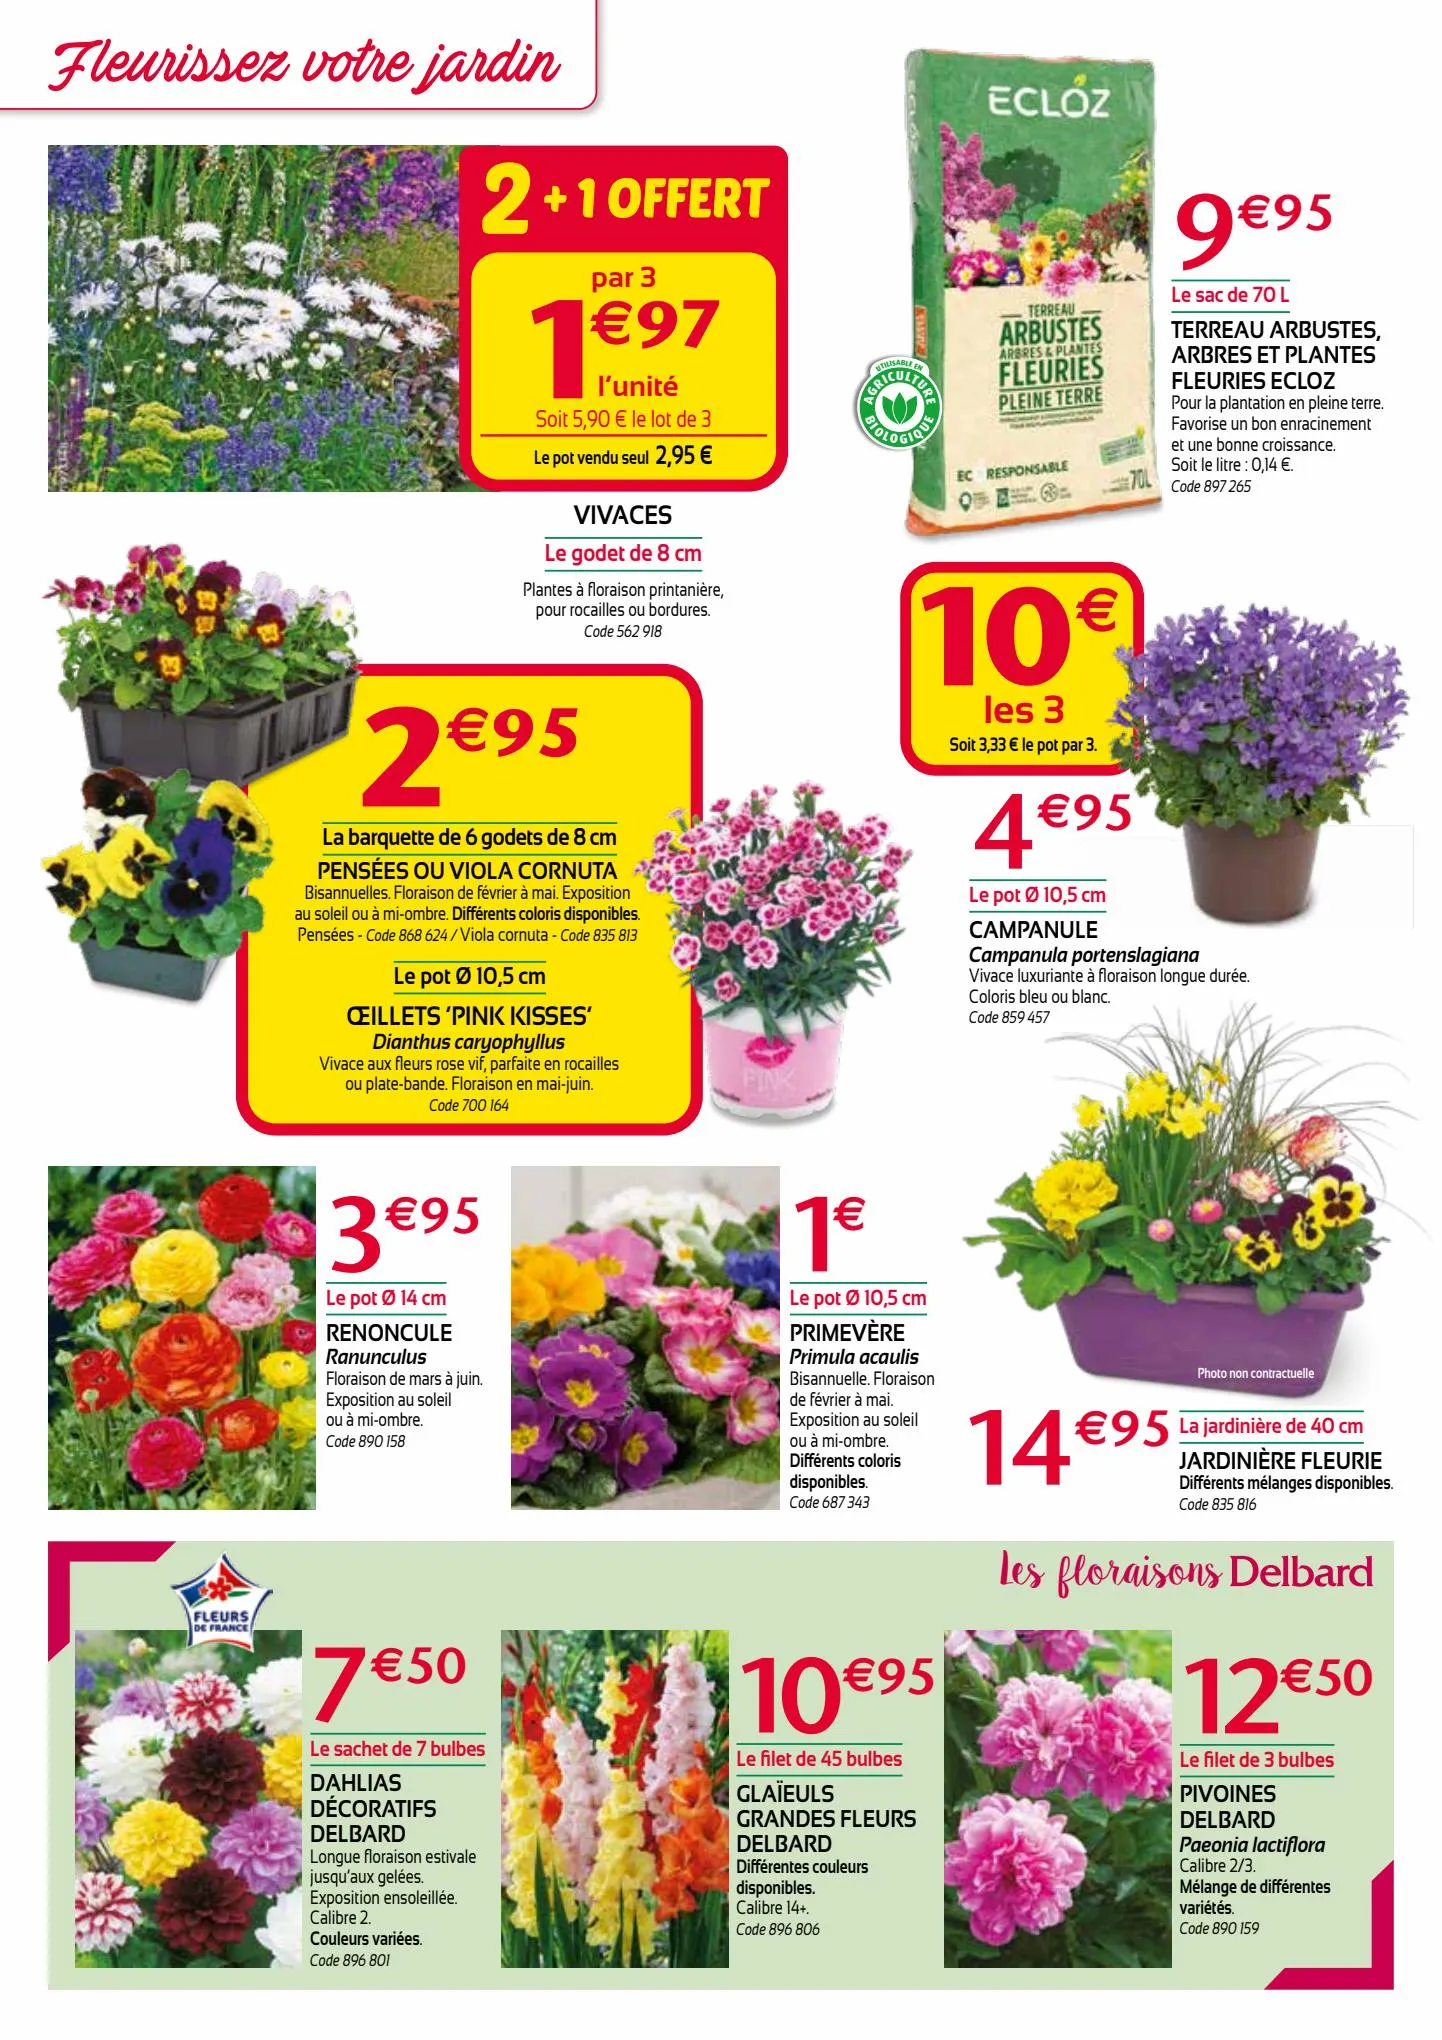 Catalogue Jardin Potager Animaux Outillage, page 00004